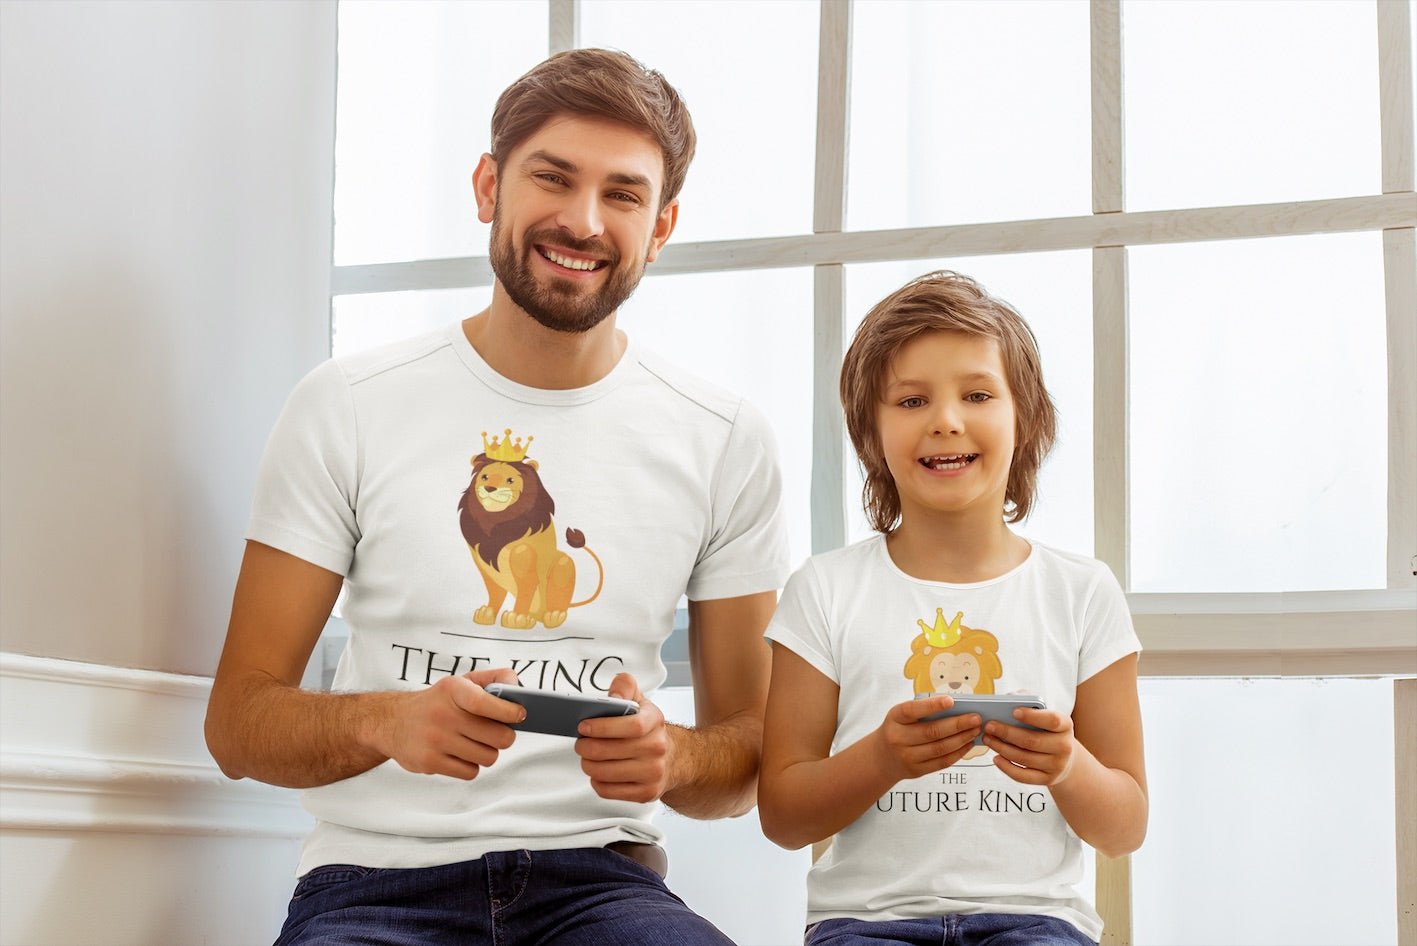 King, Future King | Father & Son Matching T-shirts | Father's Day Gift - Three2Tango Tee's